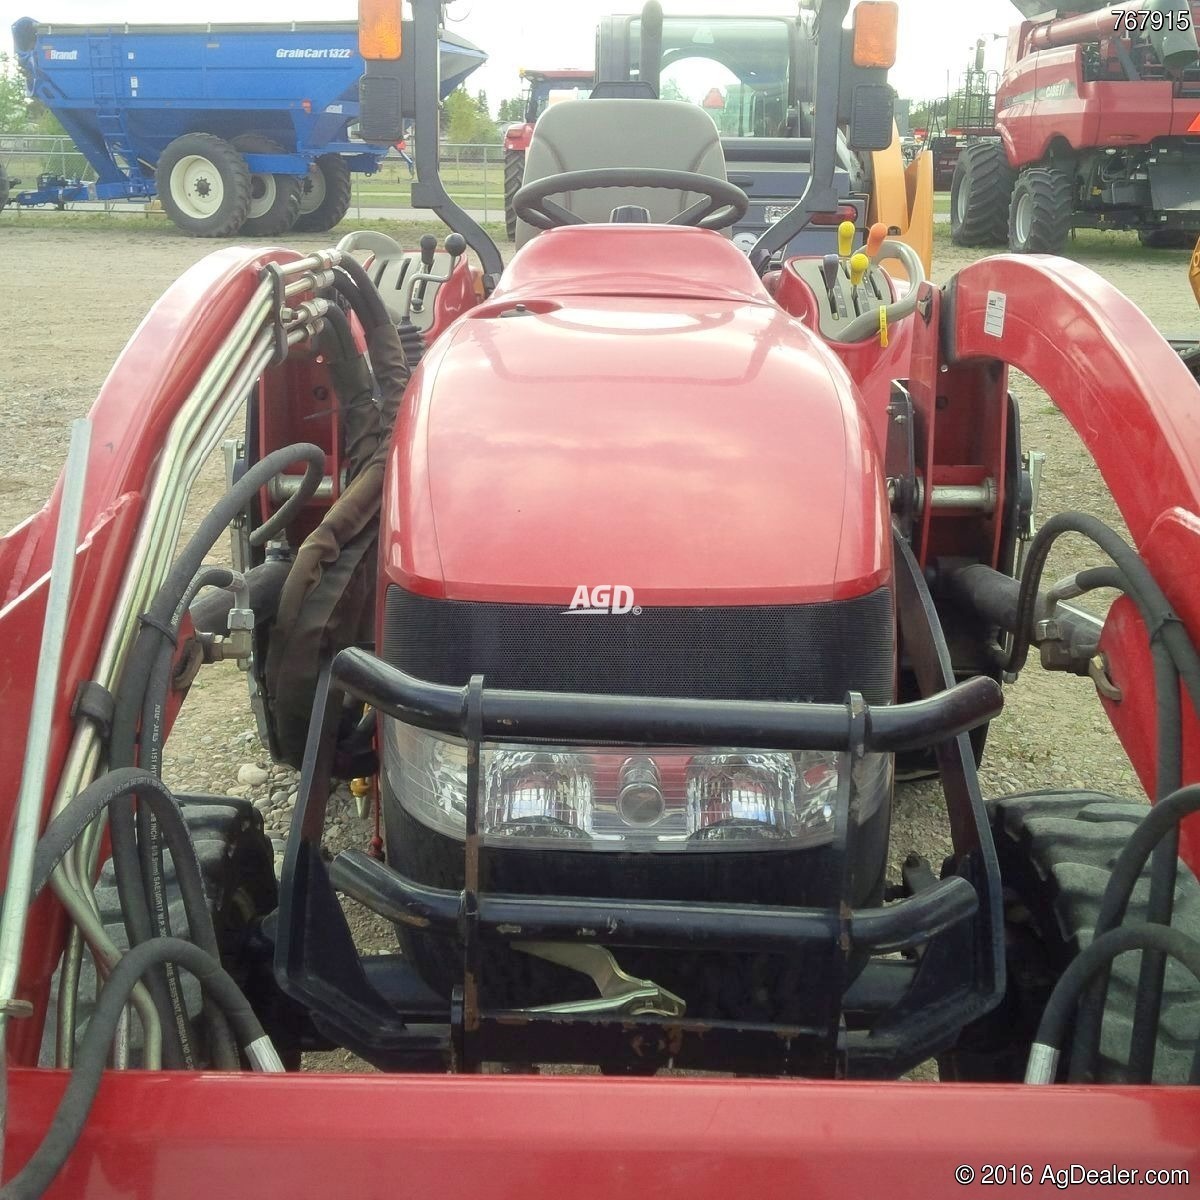 2007 Case IH Farmall DX31 Tractor - Compact For Sale | AgDealer.com